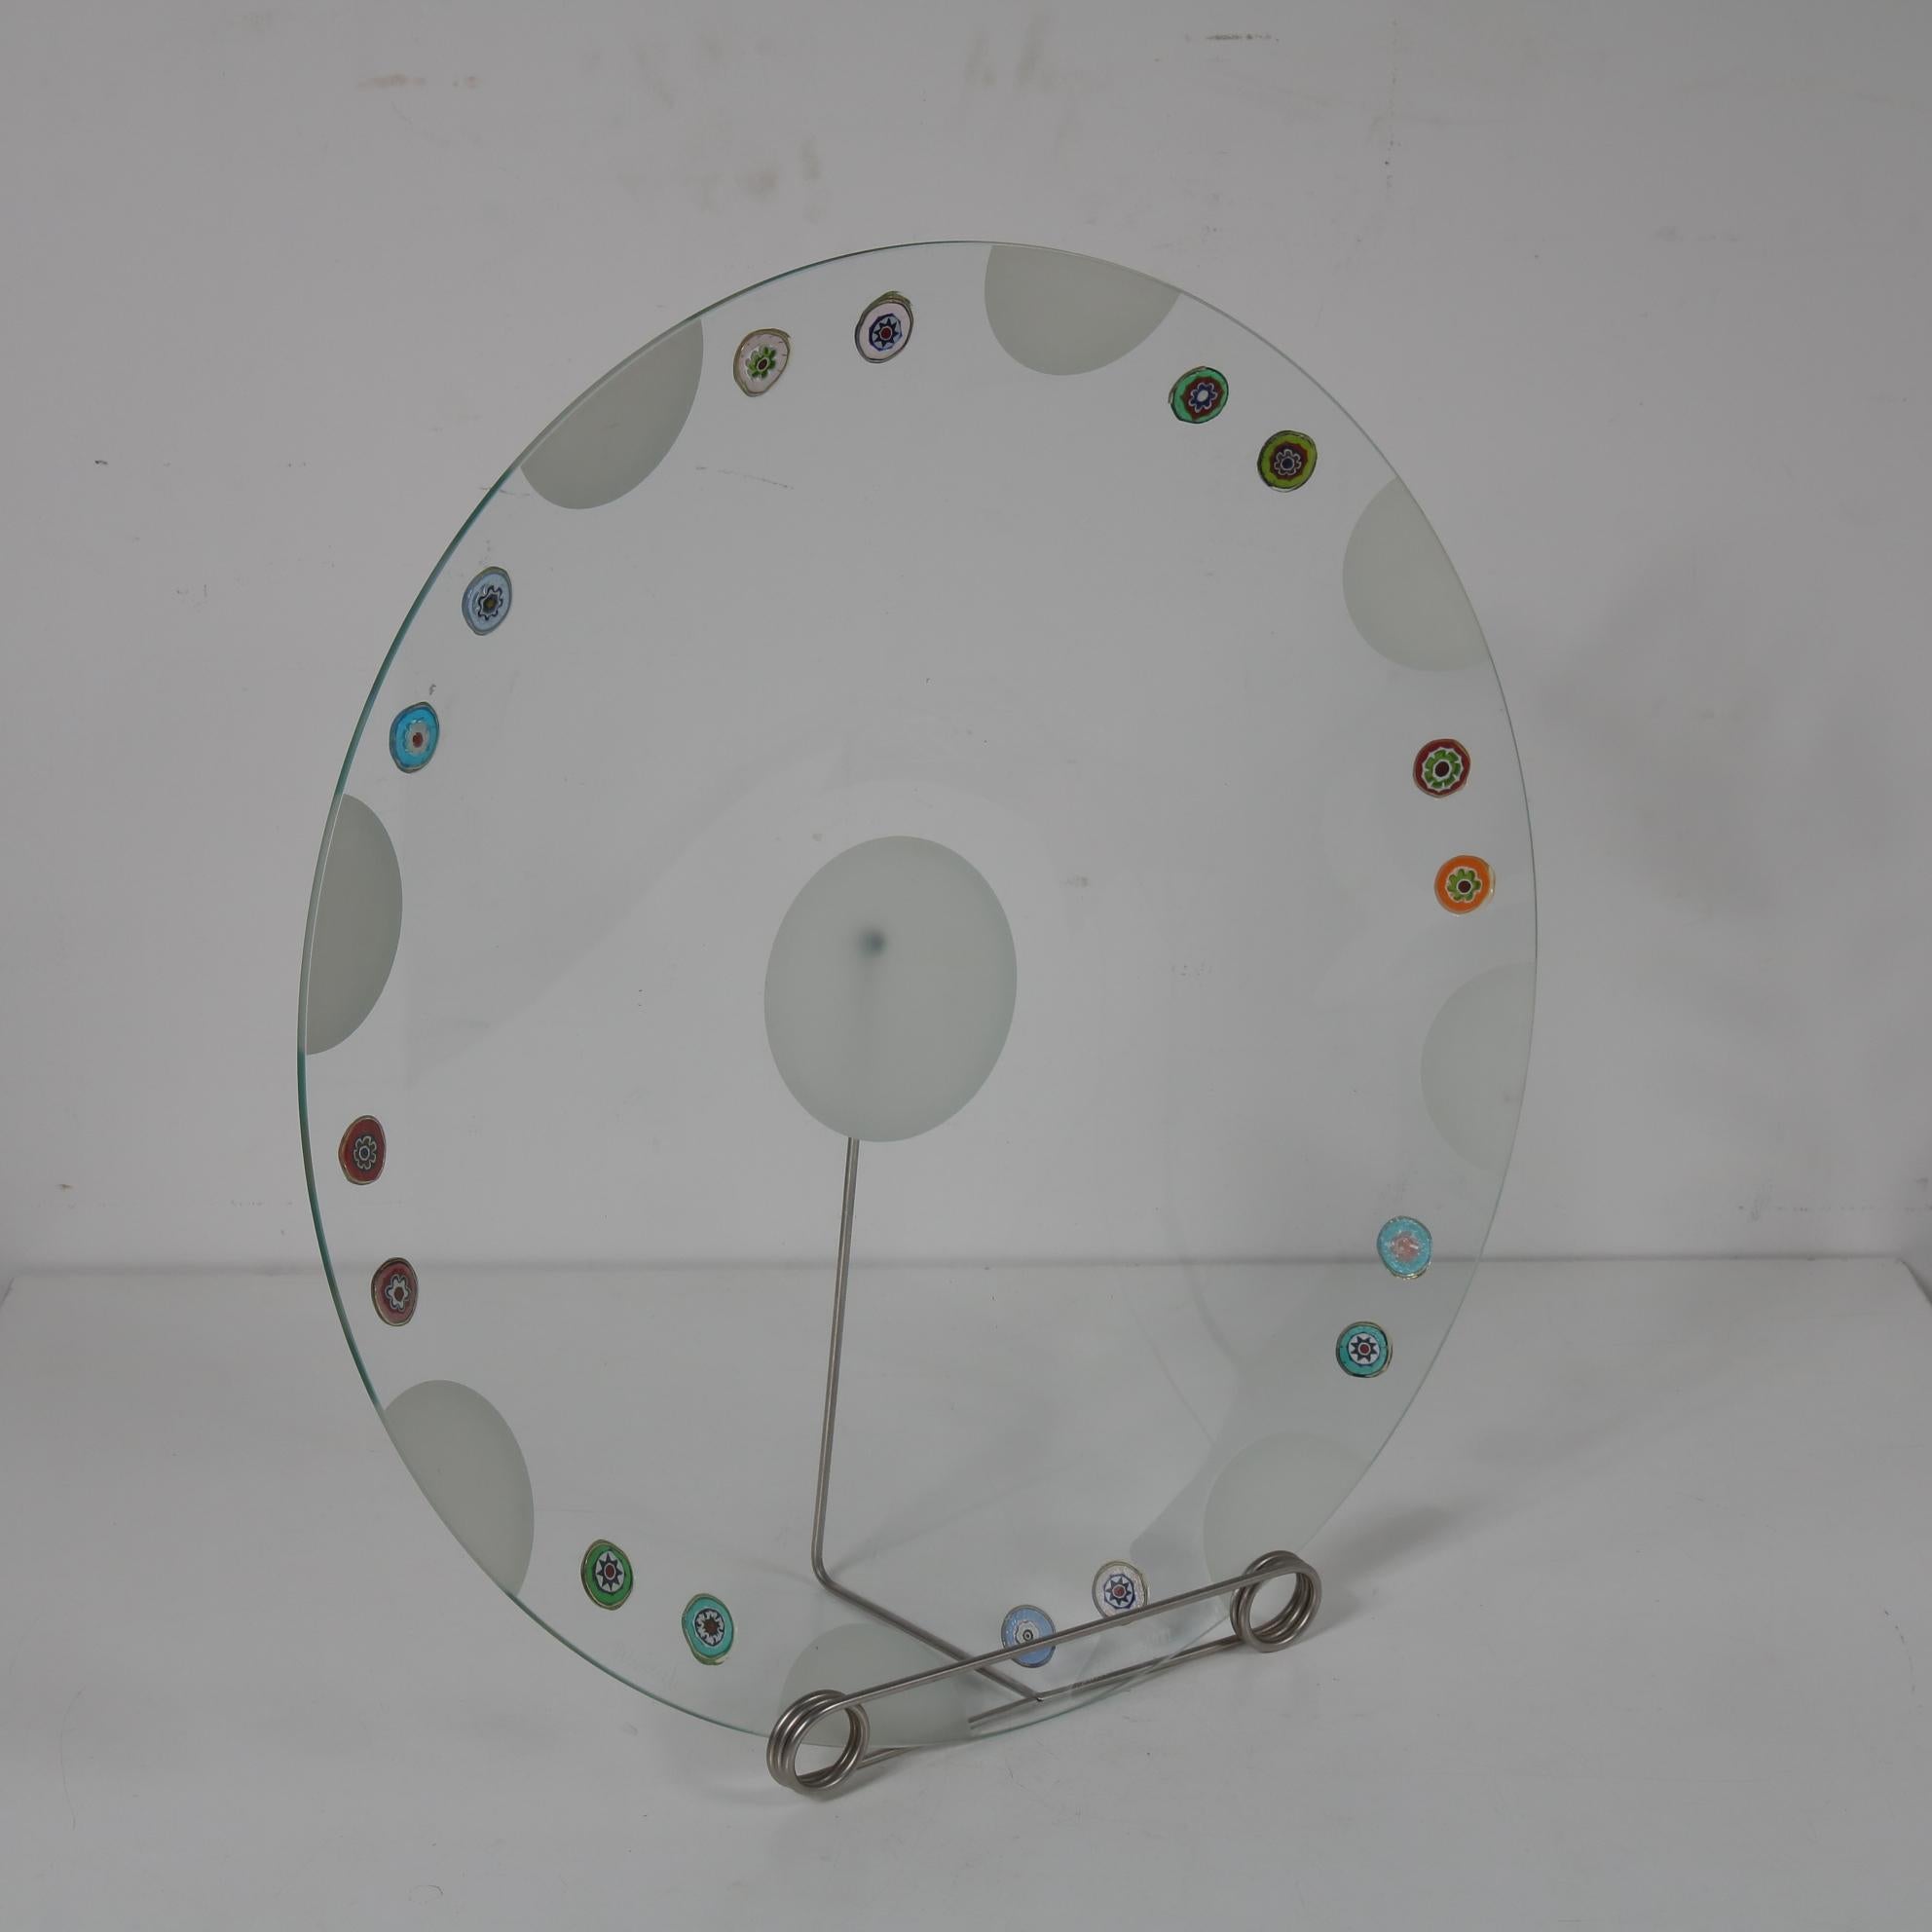 A beautiful, very rare and limited edition glass plate designed by Bruno Munari for his 